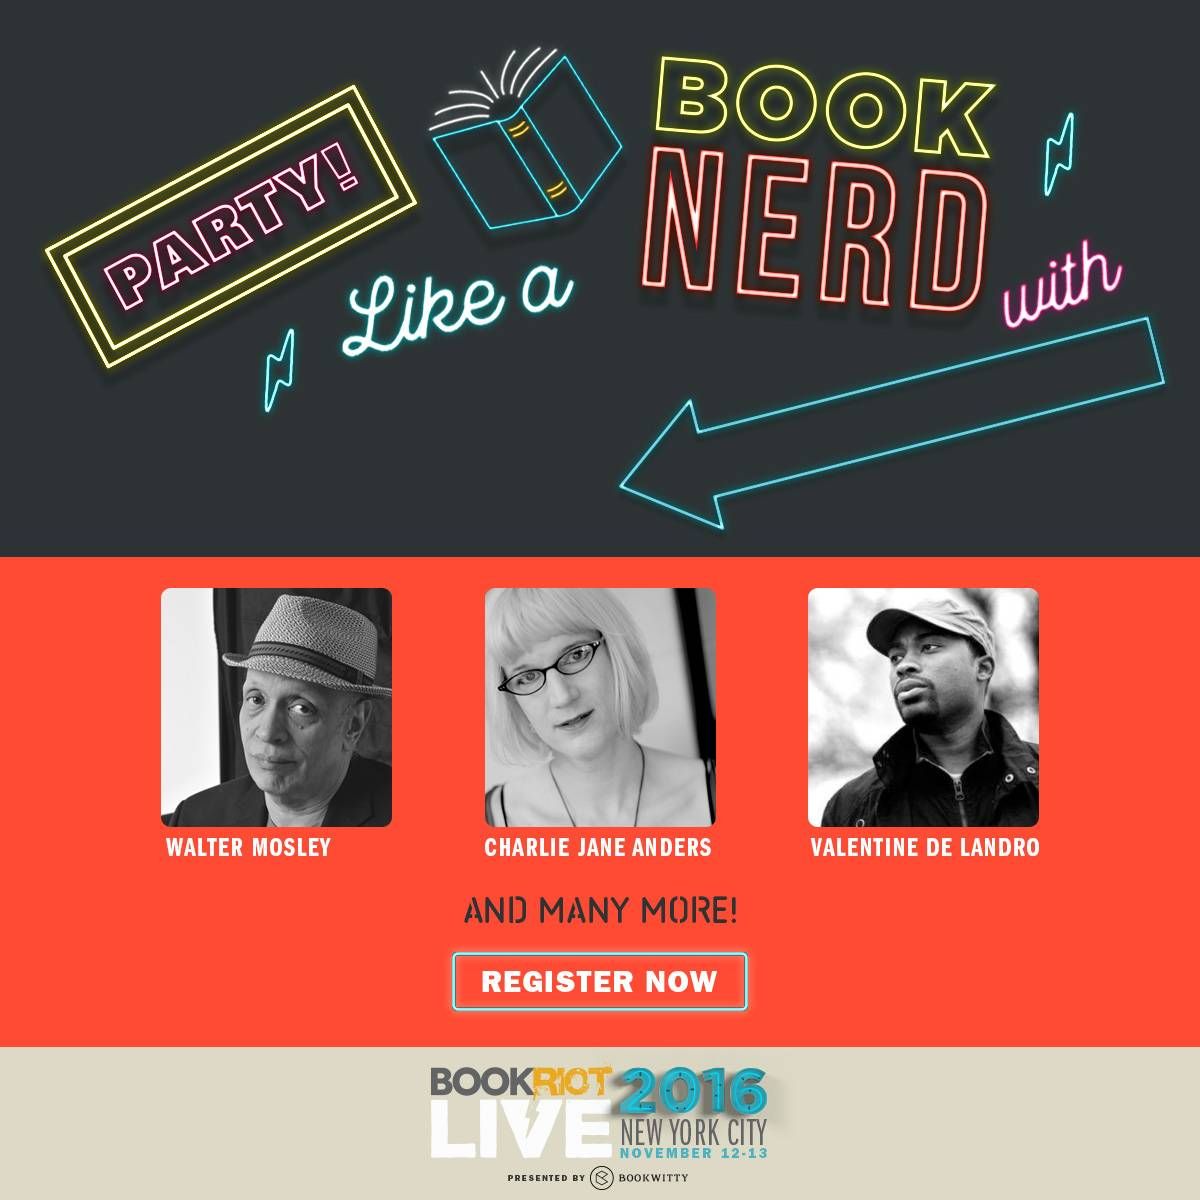 Party Like a Book Nerd image featuring Walter Mosley, Charlie Jane Anders, and Valentine De Landro